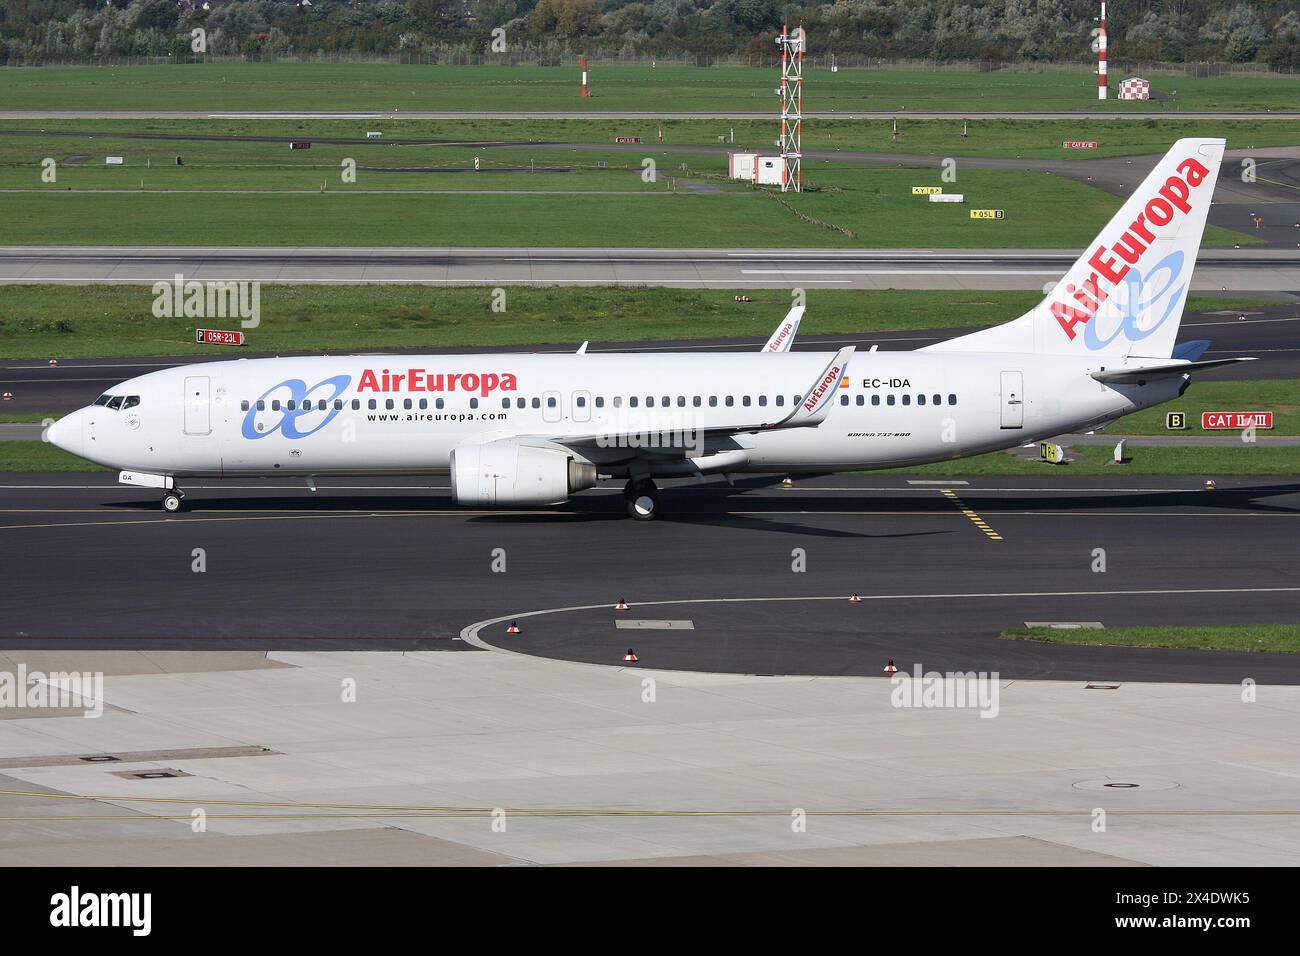 Spanish Air Europa Boeing 737-800 with registration EC-IDA on taxiway at Dusseldorf Airport Stock Photo